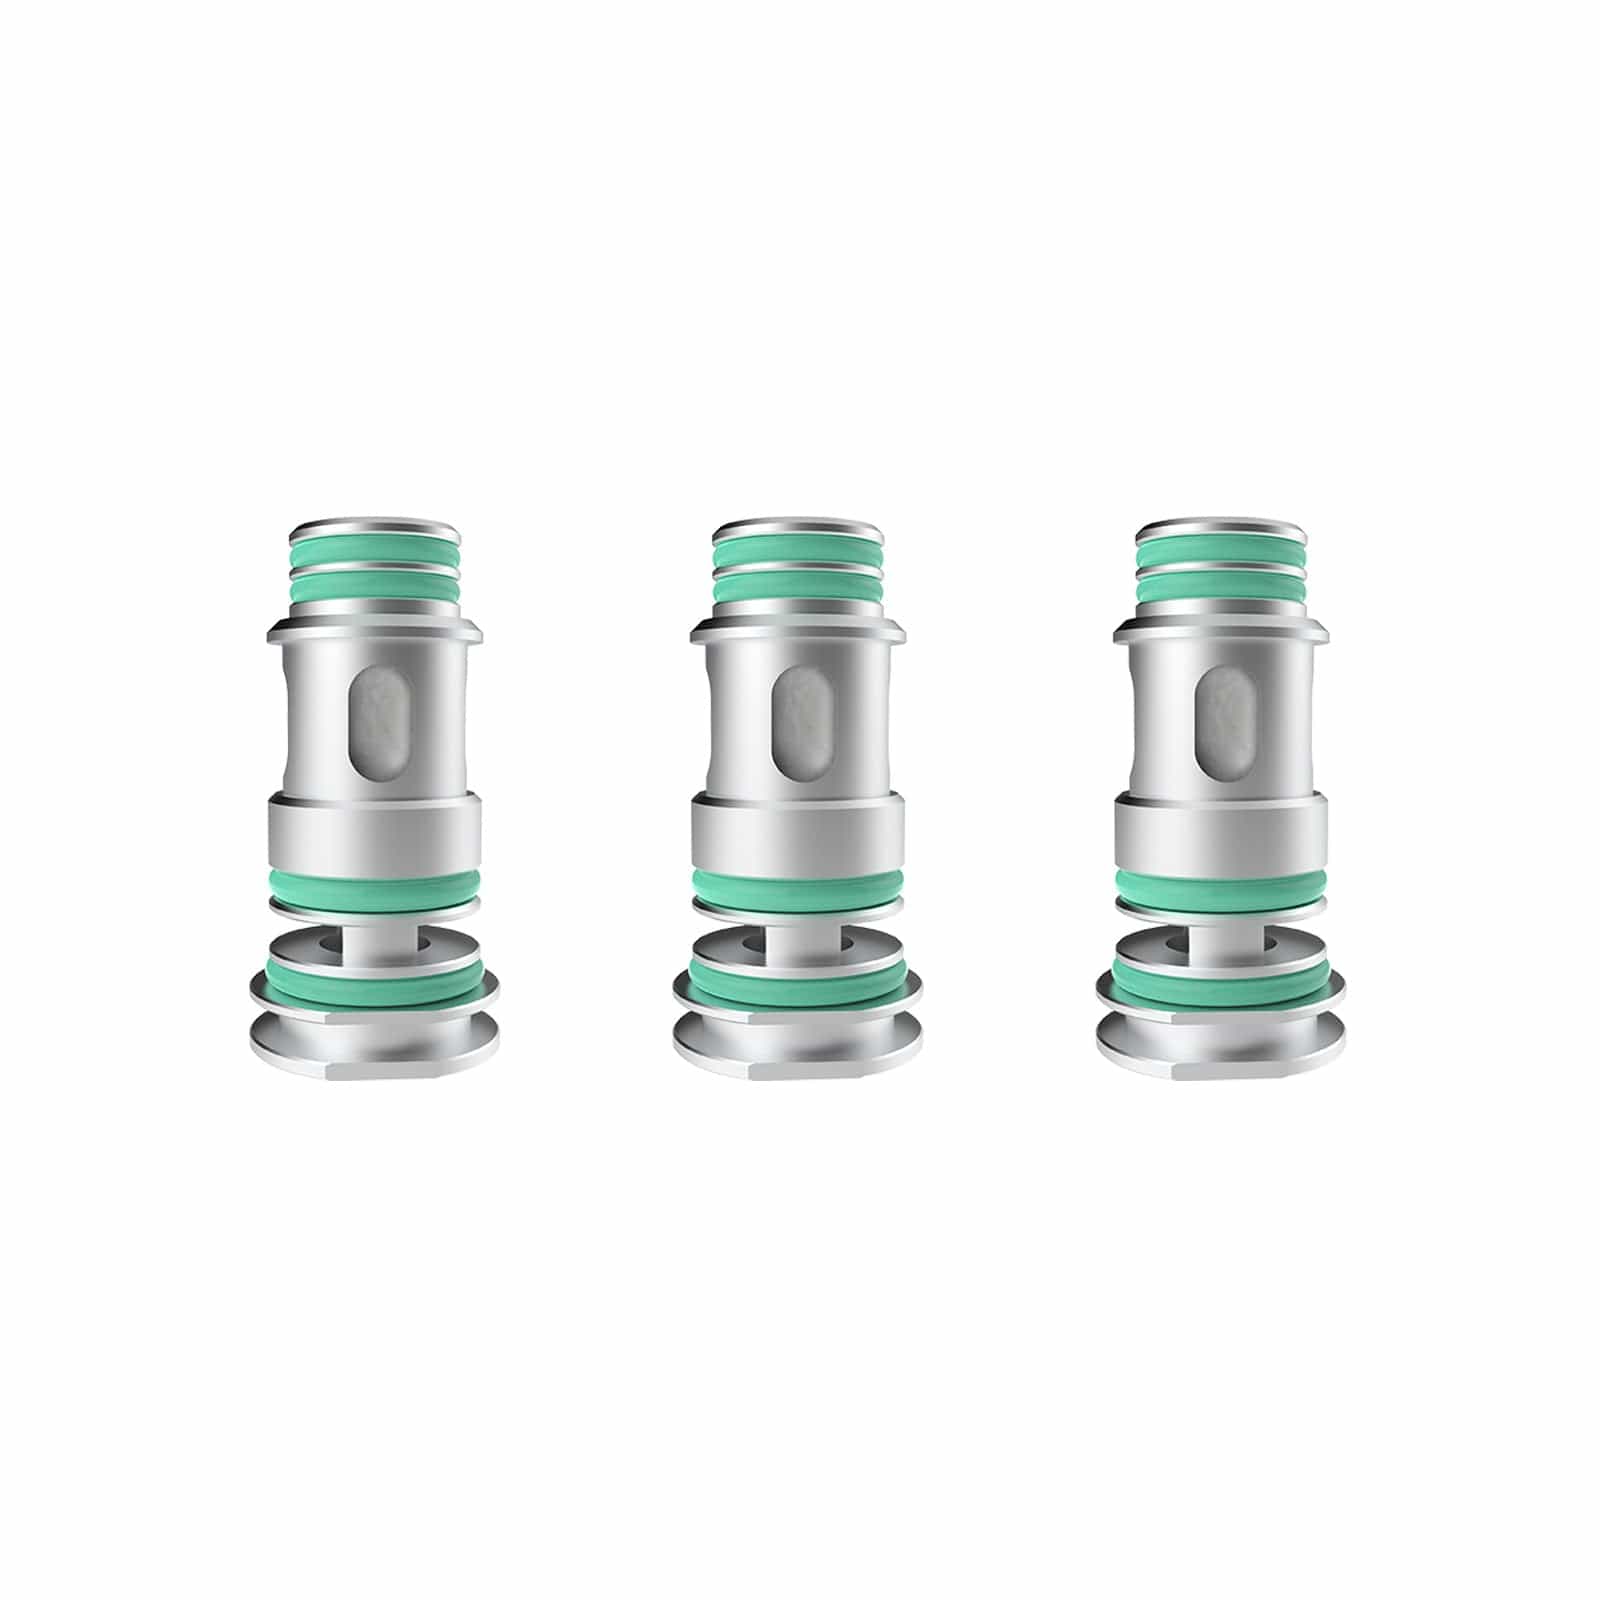 Suorin Coils Suorin SPCE Replacement Coils (3x Pack)